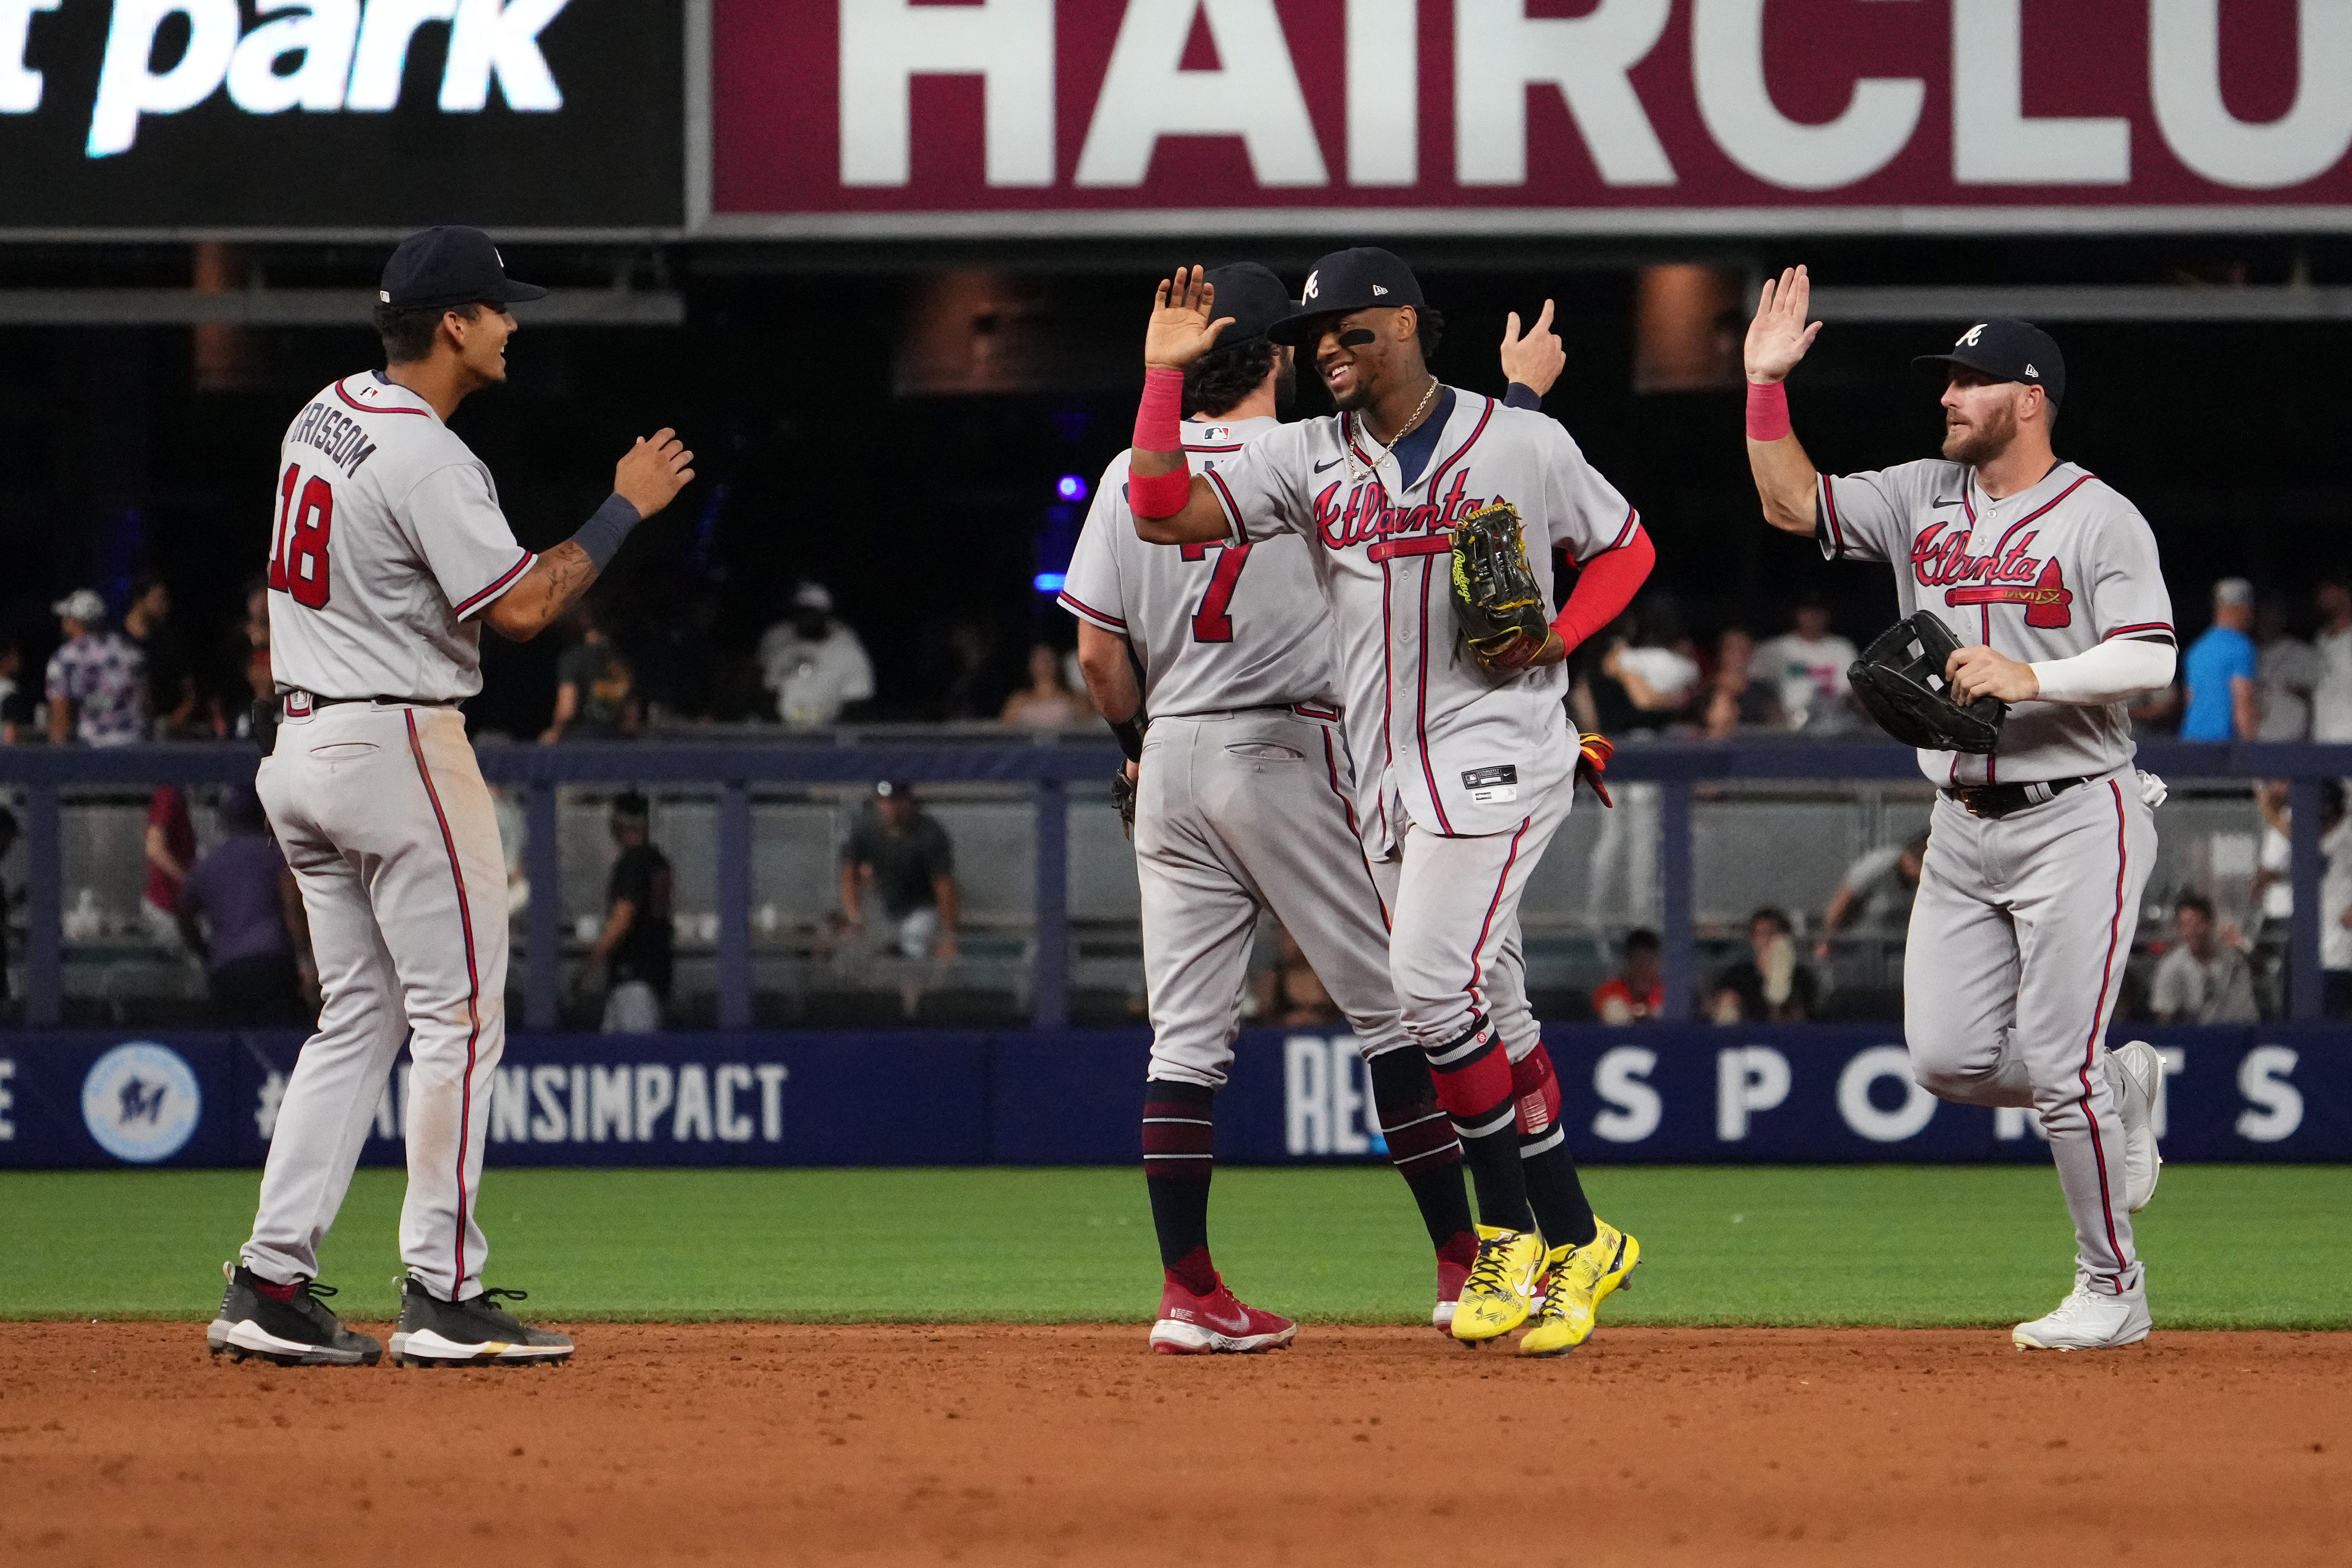 Starling Marte 'tampers' with Juan Soto during HR Derby